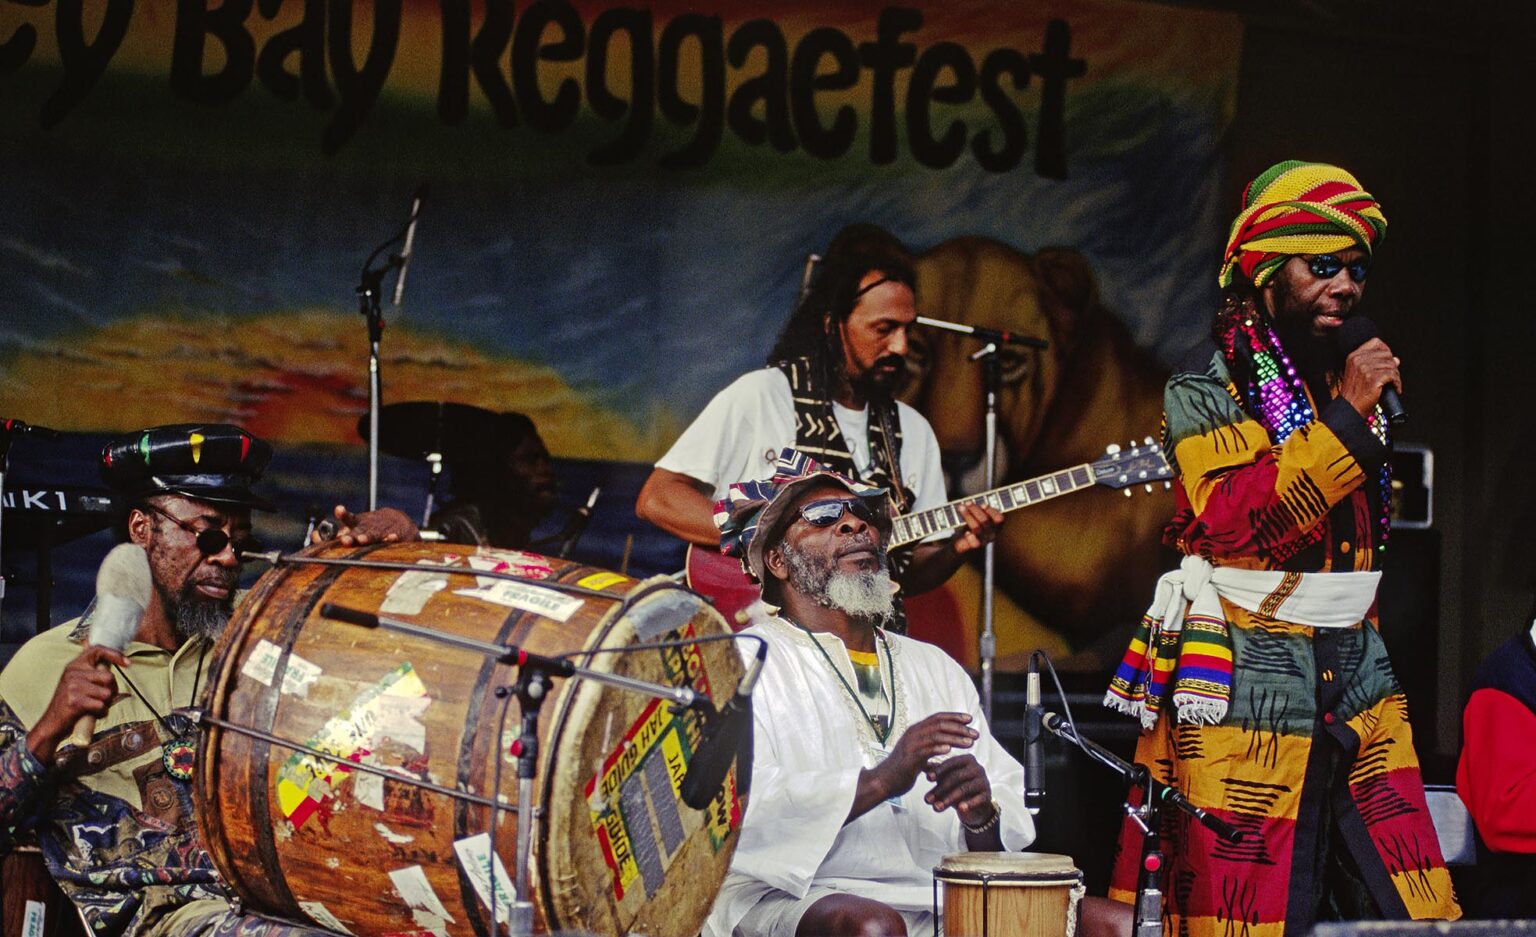 RAS MICHAEL and his BAND play at the MONTEREY BAY REGGAE FESTIVAL - CALIFORNIA